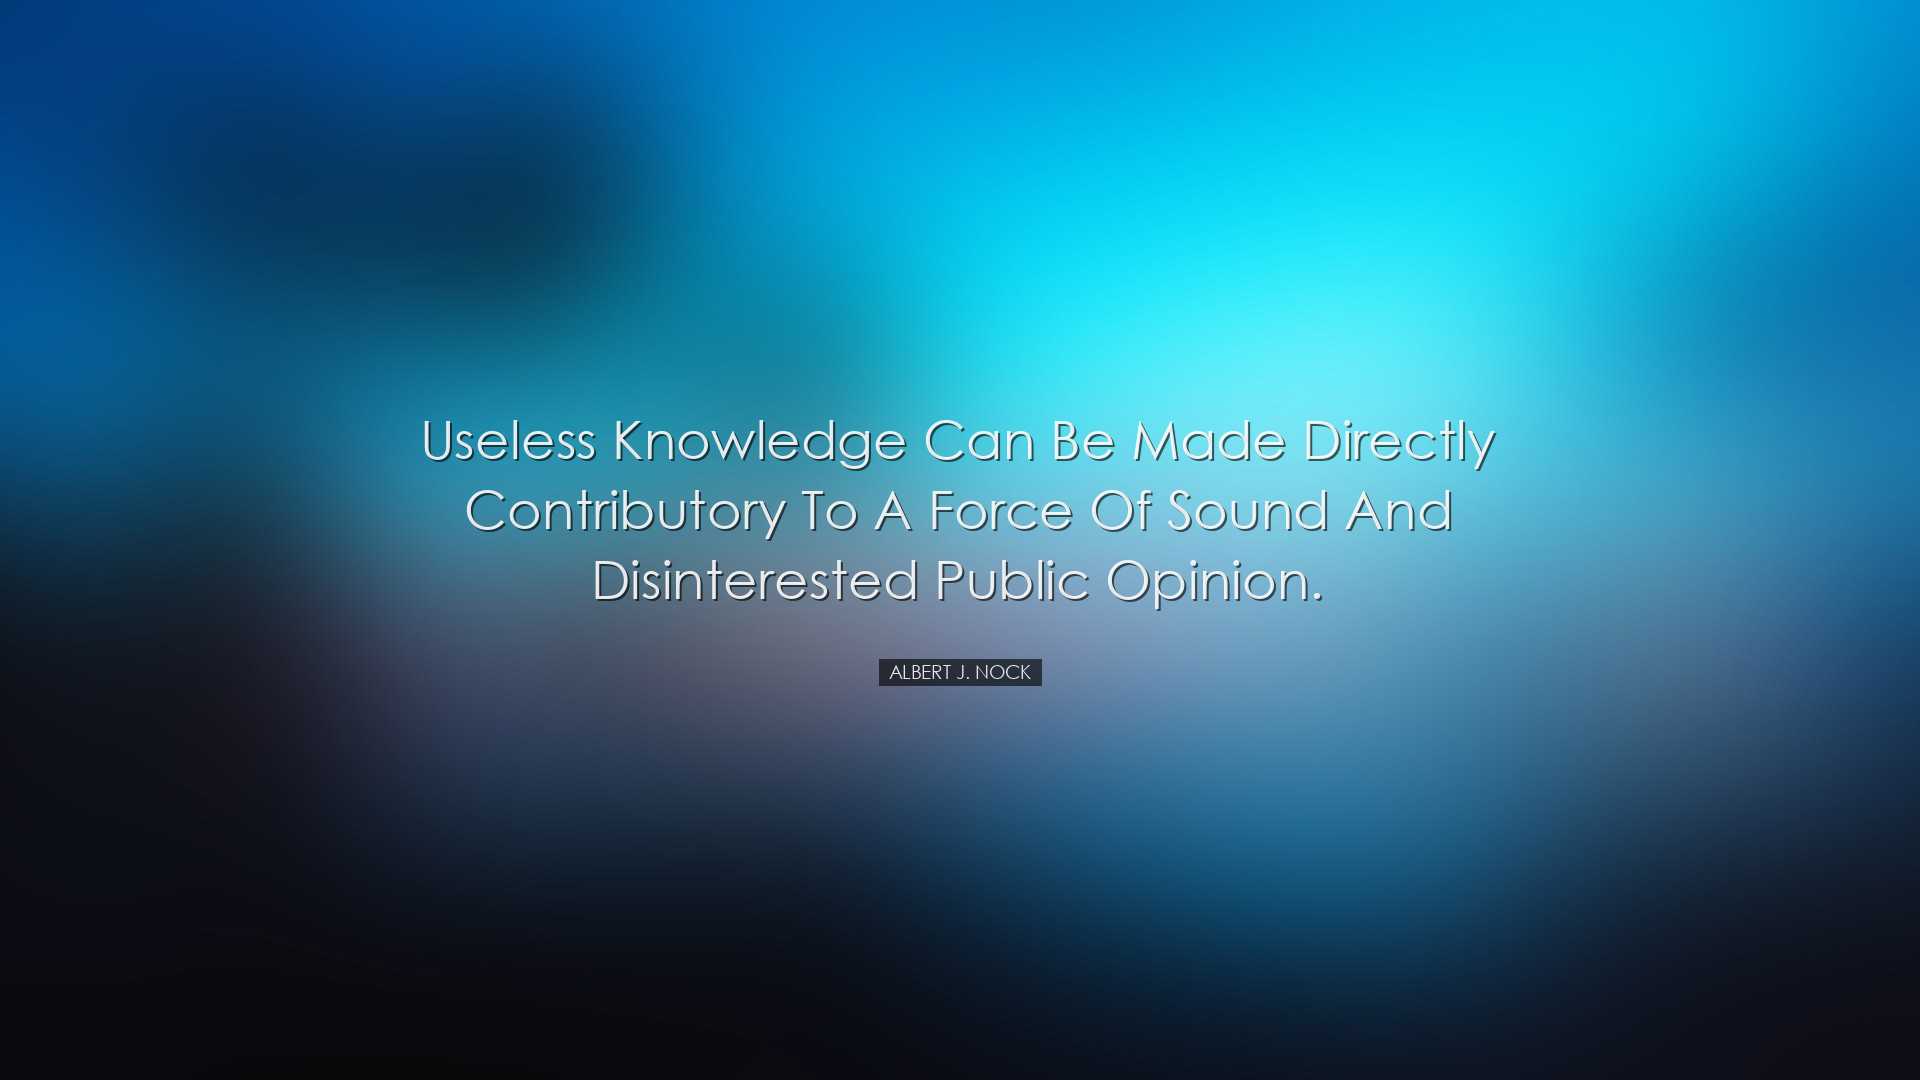 Useless knowledge can be made directly contributory to a force of